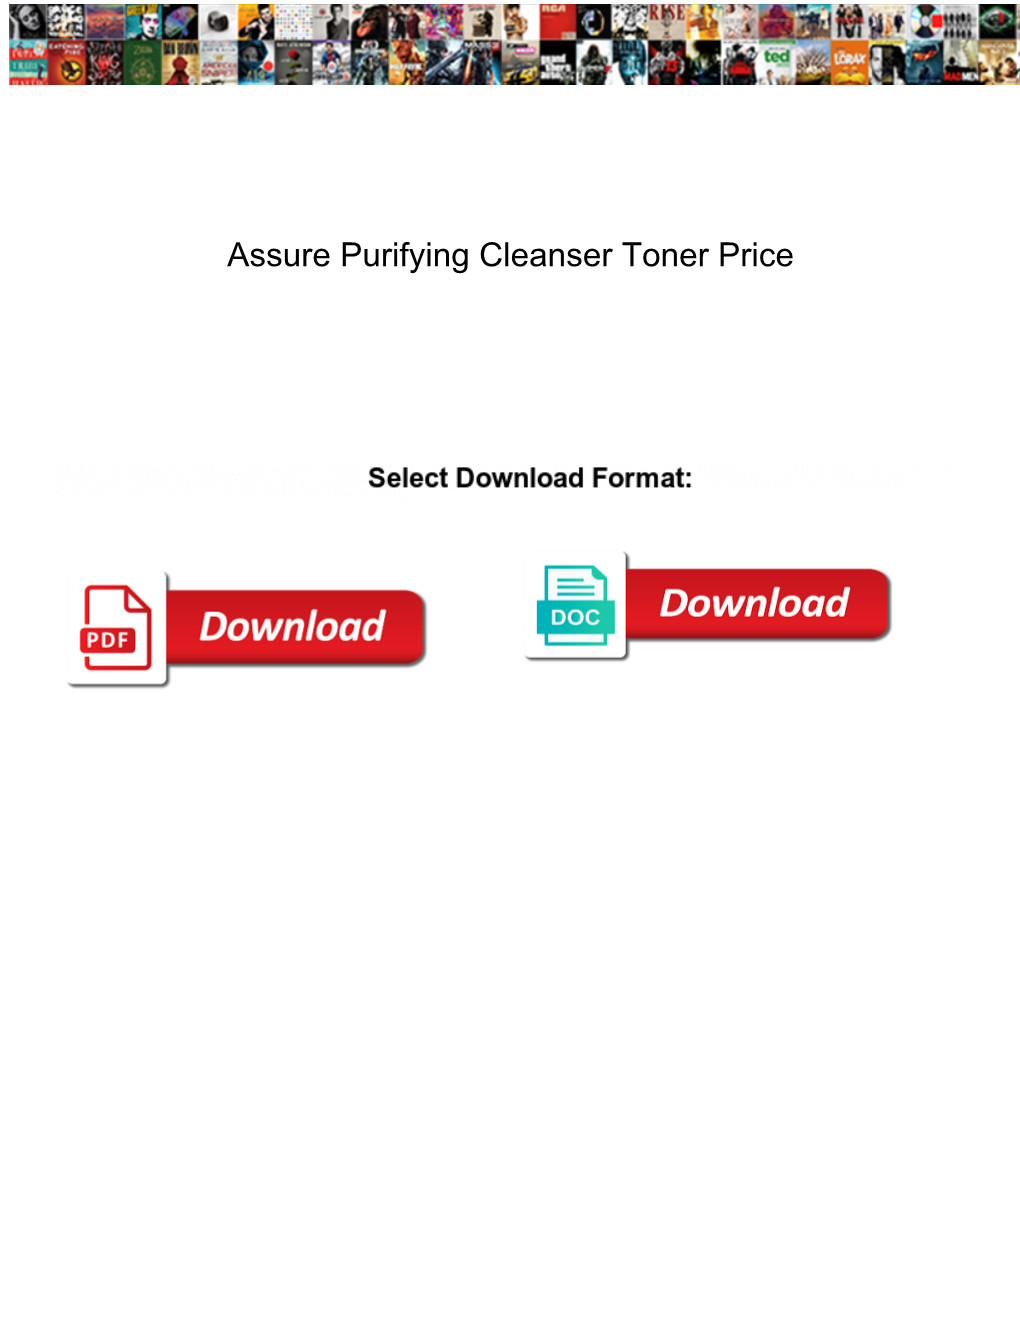 Assure Purifying Cleanser Toner Price